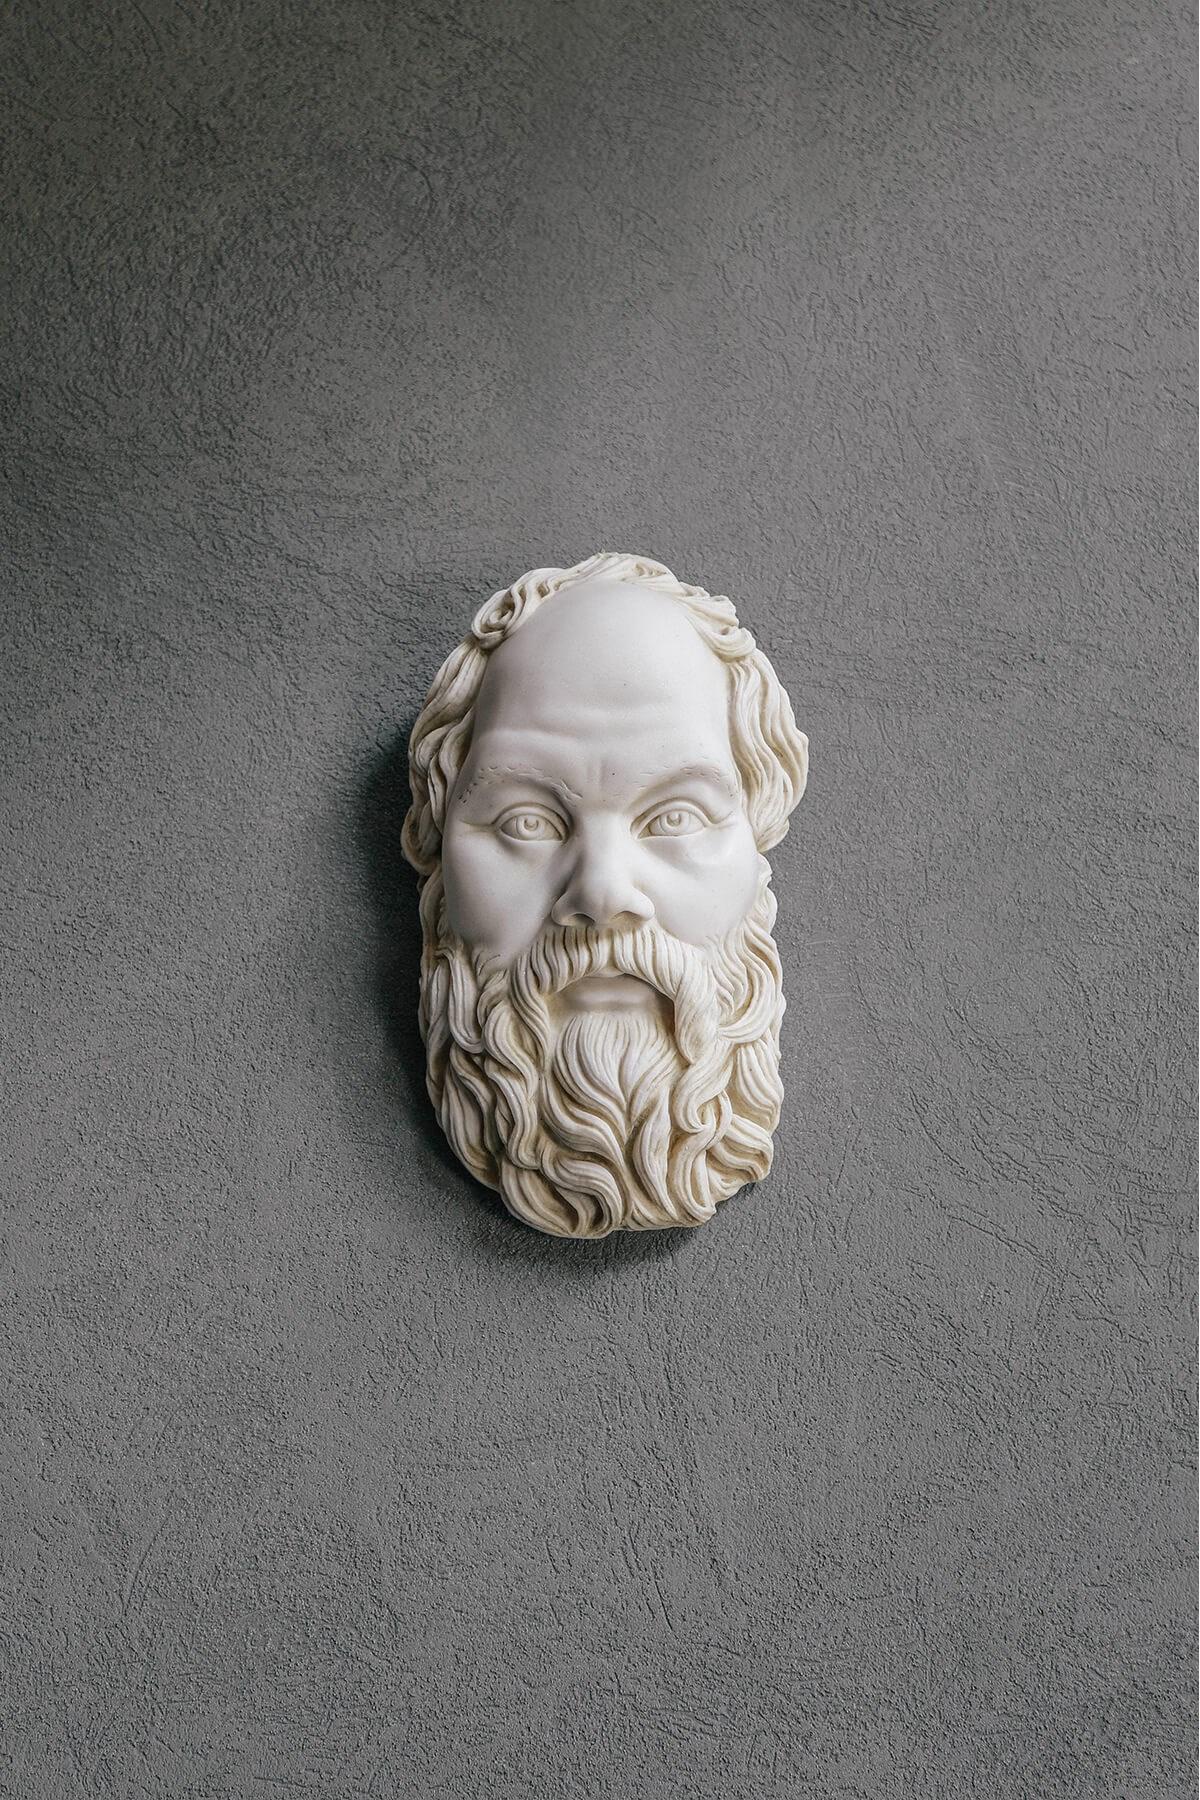 Turkish Socrates Mask Made with Compressed Marble Powder in stock For Sale